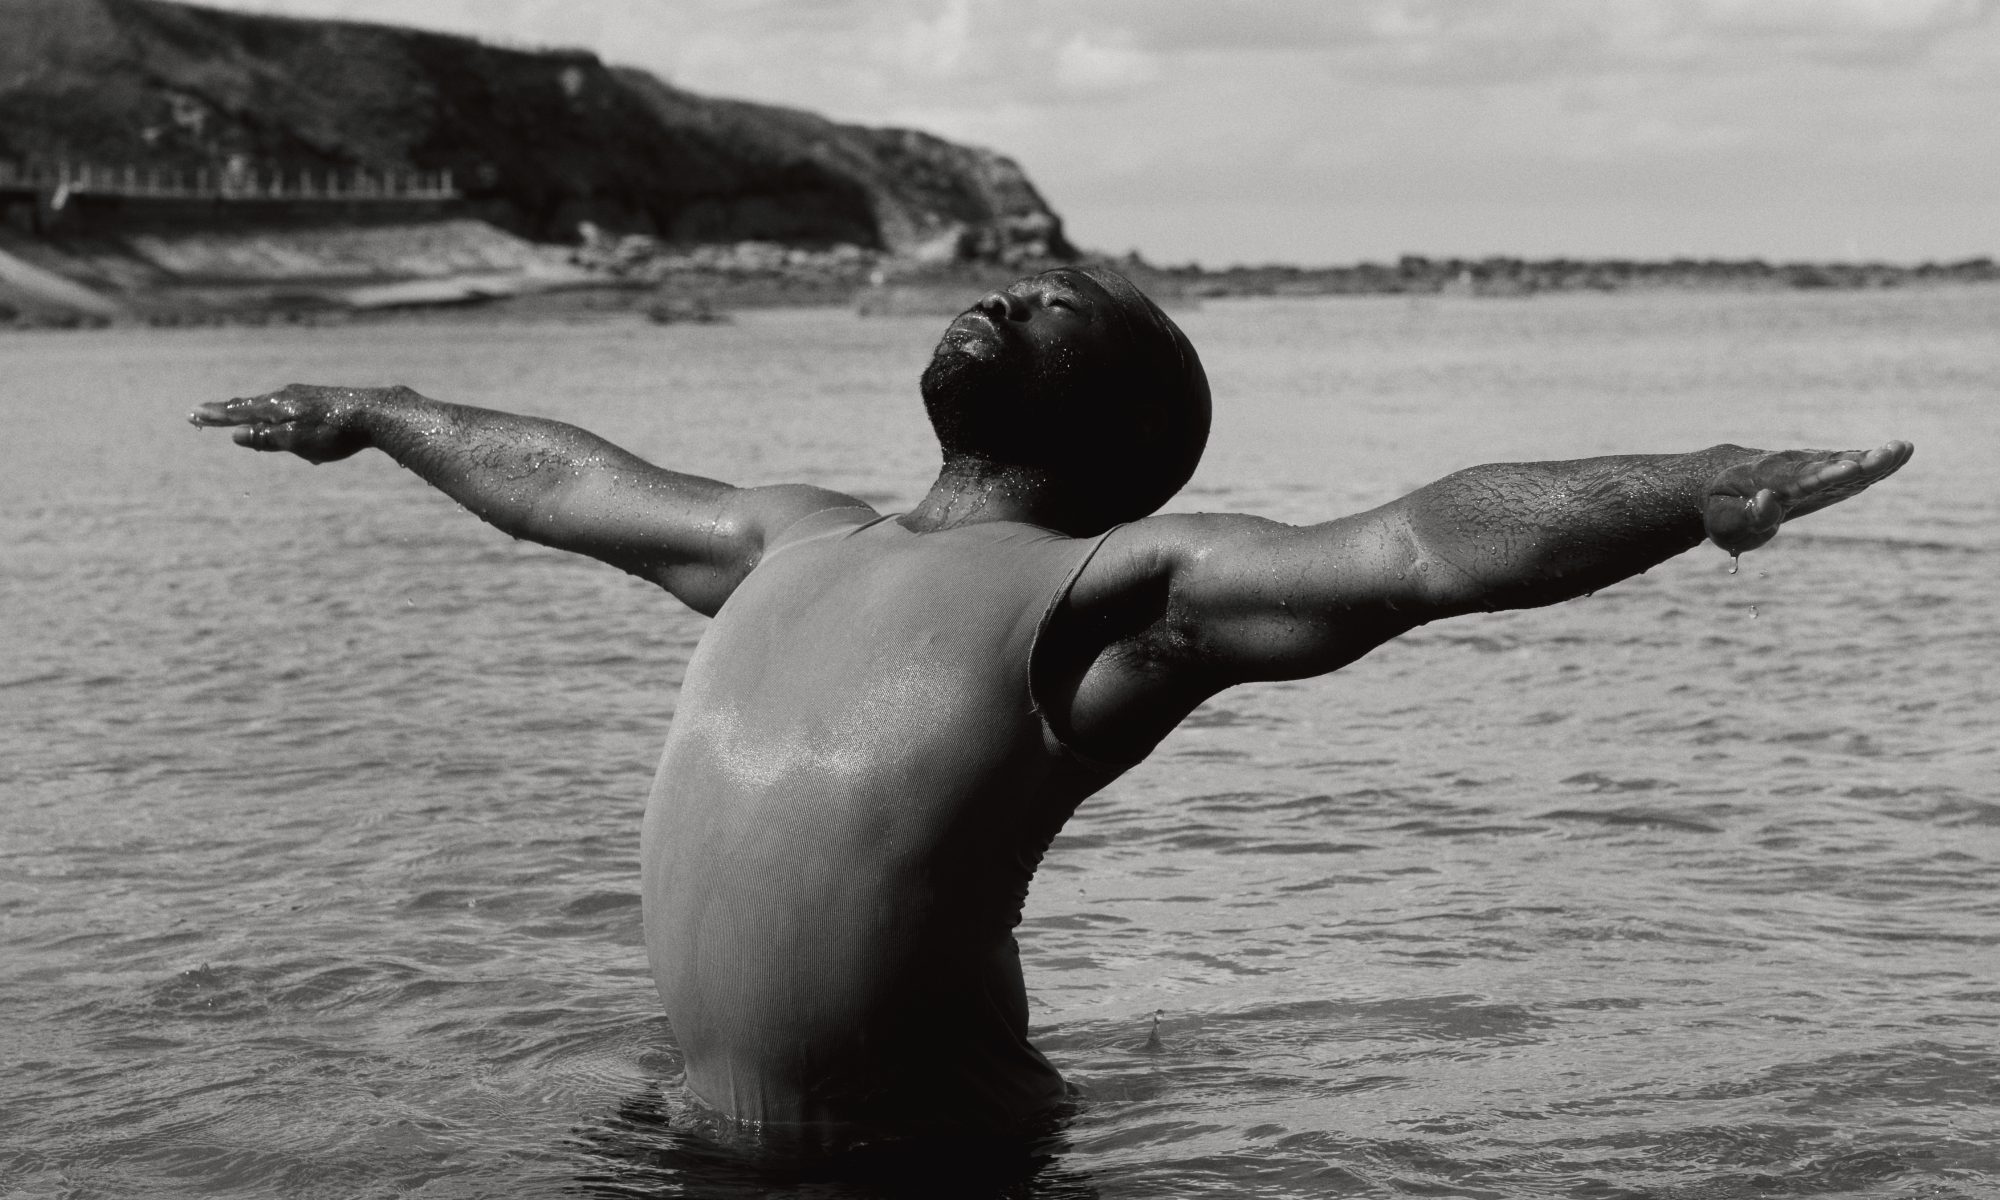 Jeremiah standing waist deep in the ocean, leaning backwards, arms spread out on each side while facing the sky with his eyes closed.